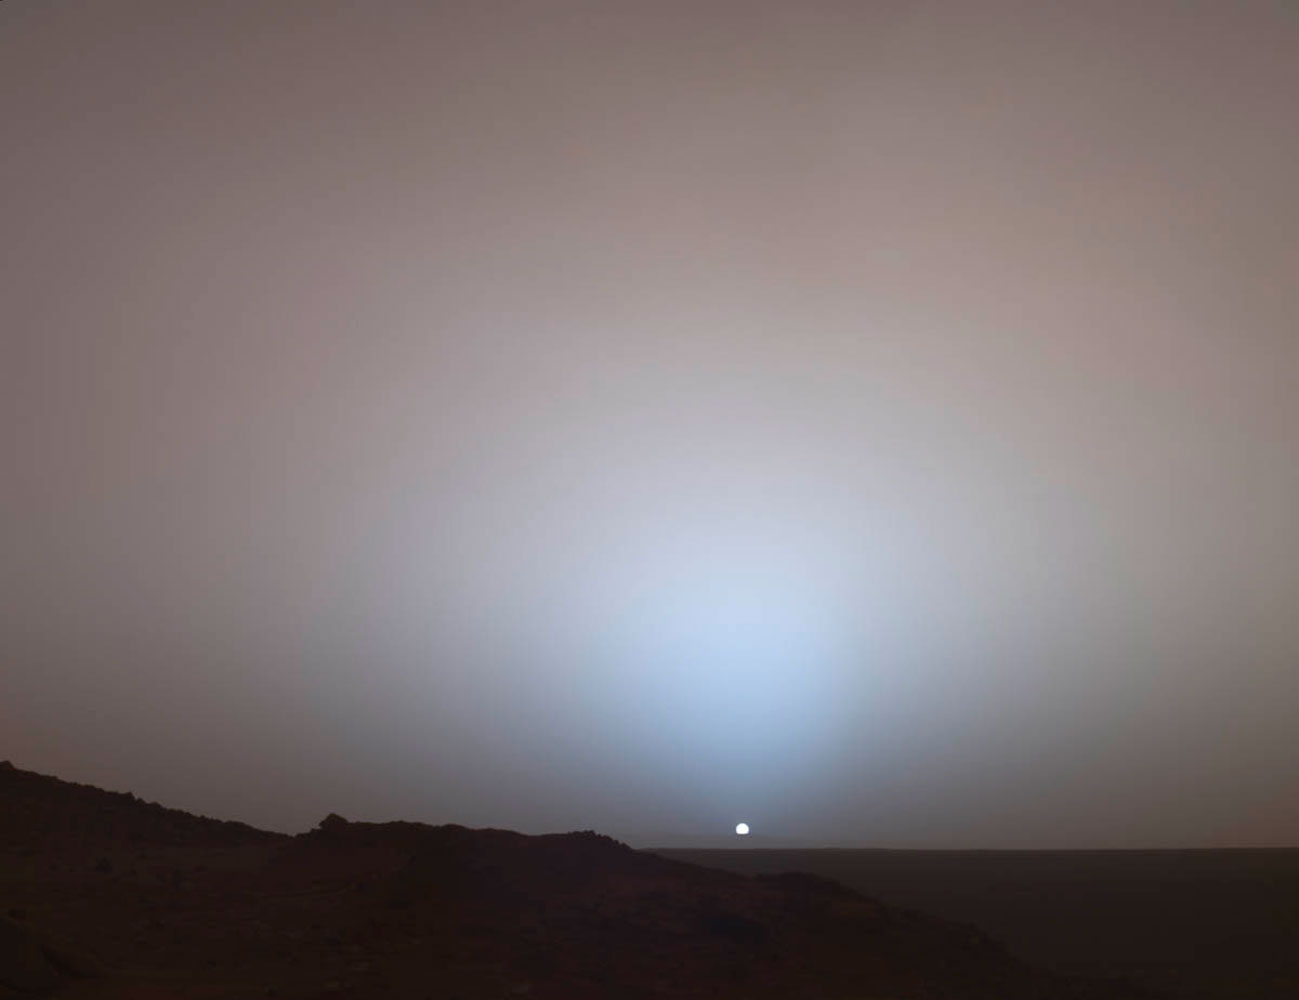 The Mars Rover Spirit took this sublime view of a sunset over the rim of Gusev Crater, about 80 kilometers (50 miles) away.